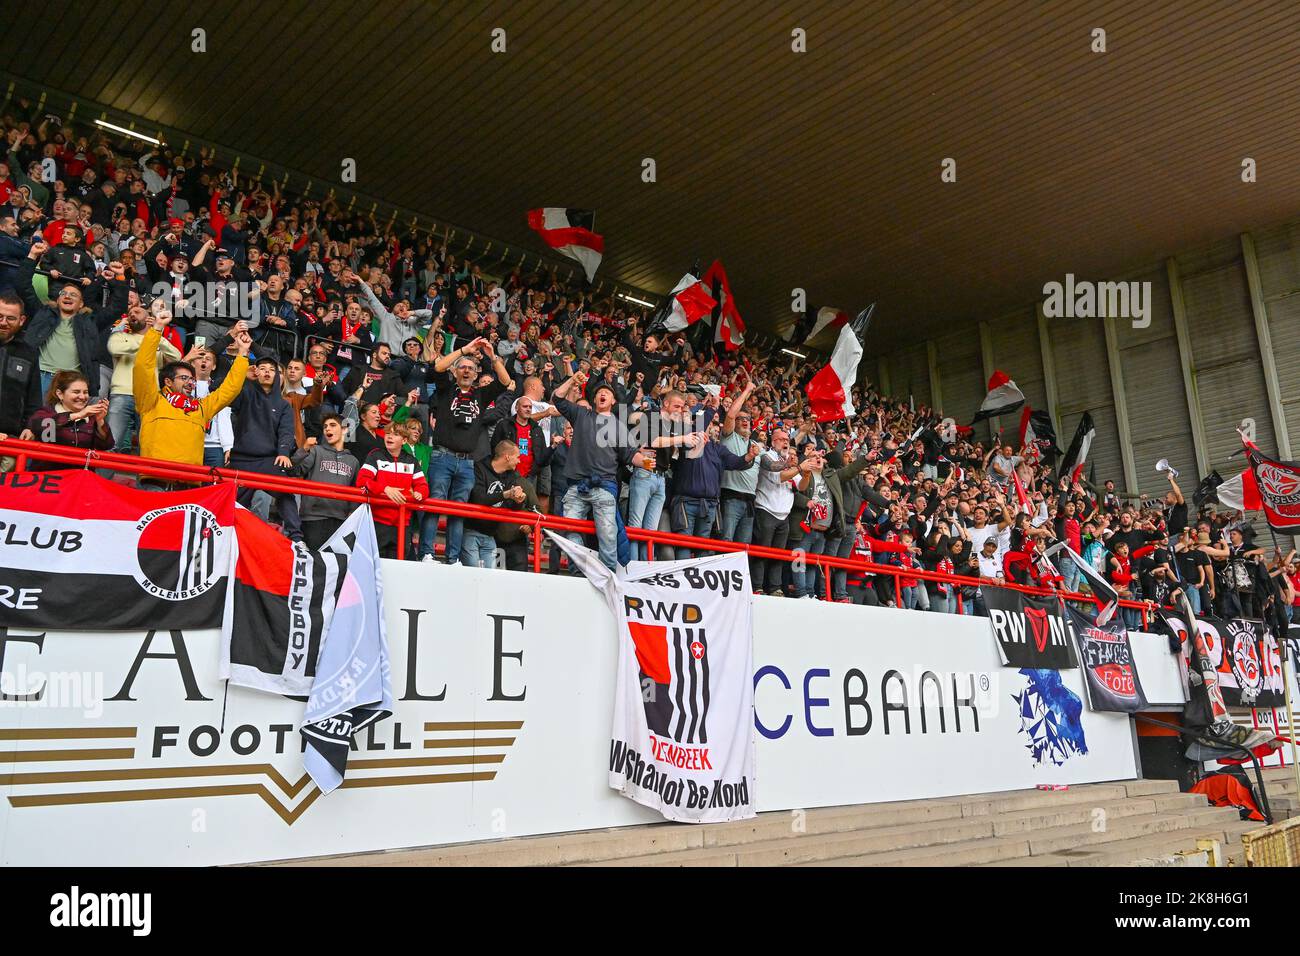 Fans and supporters of RWDM pictured during a soccer match between RWDM ...